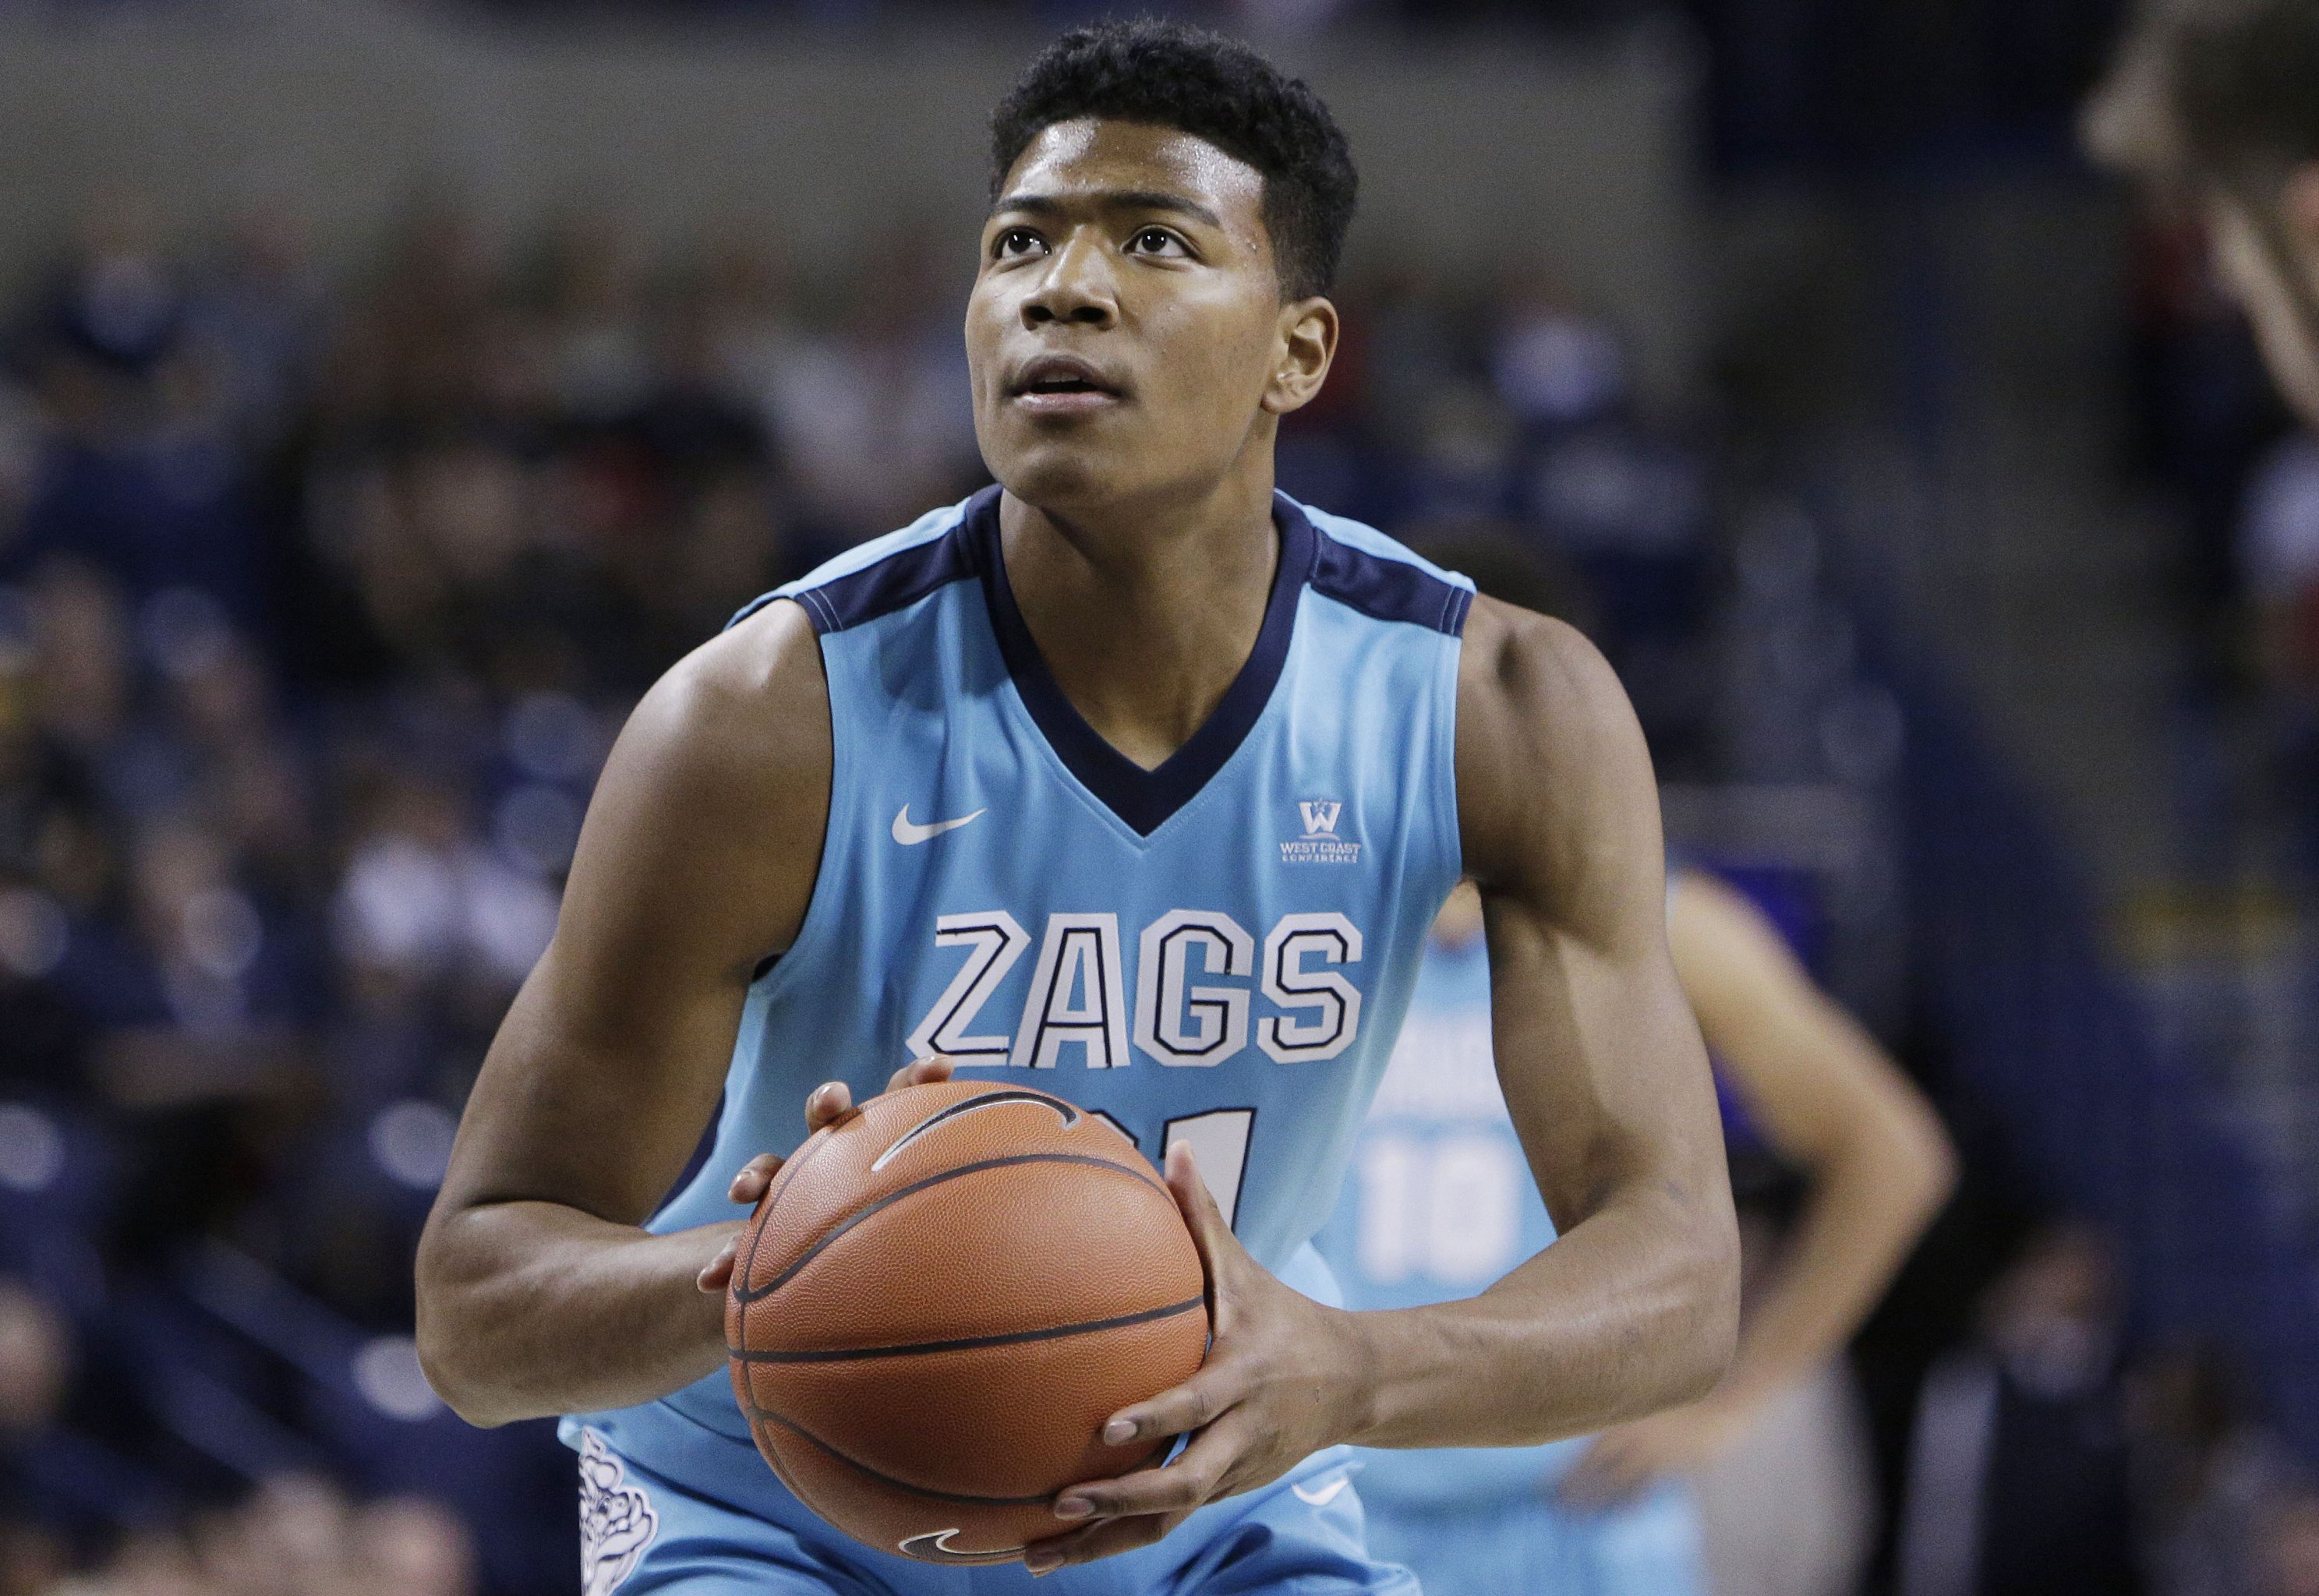 Who Are Rui Hachimura's Parents? Meet the NBA Player's Family